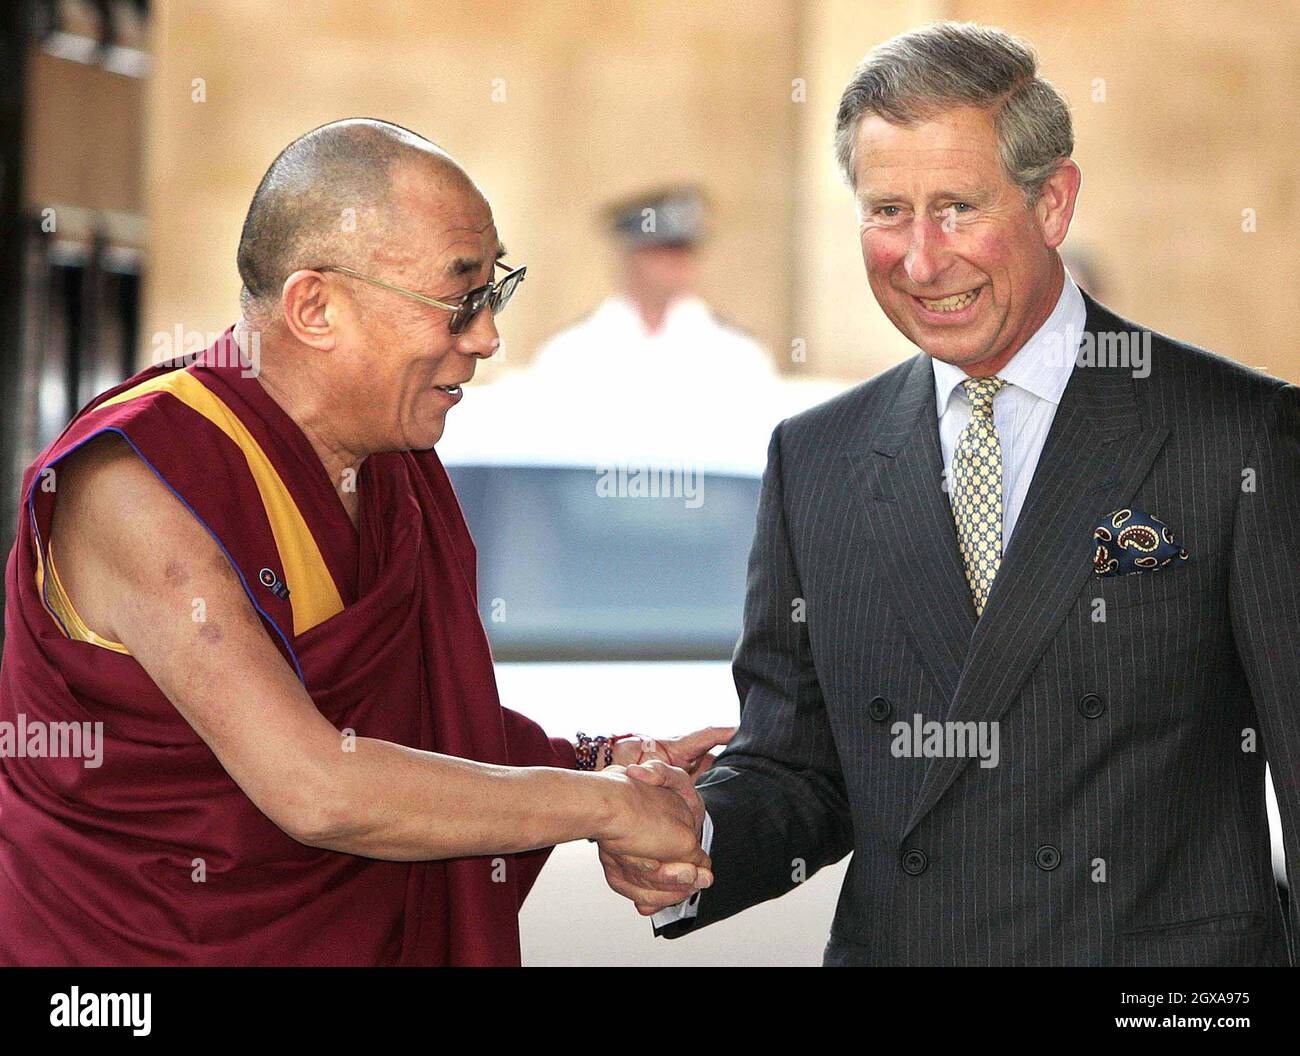 Britain's Prince Charles greets the 14th Dalai Lama, Tenzin Gyatso, at a reception in London. The exiled Tibetan spiritual leader is on a four day visit to Britain. China, which imposed communist rule on Tibet in 1950 and claims it as part of its territory, accuses the religious leader of separatist activities.  Stock Photo